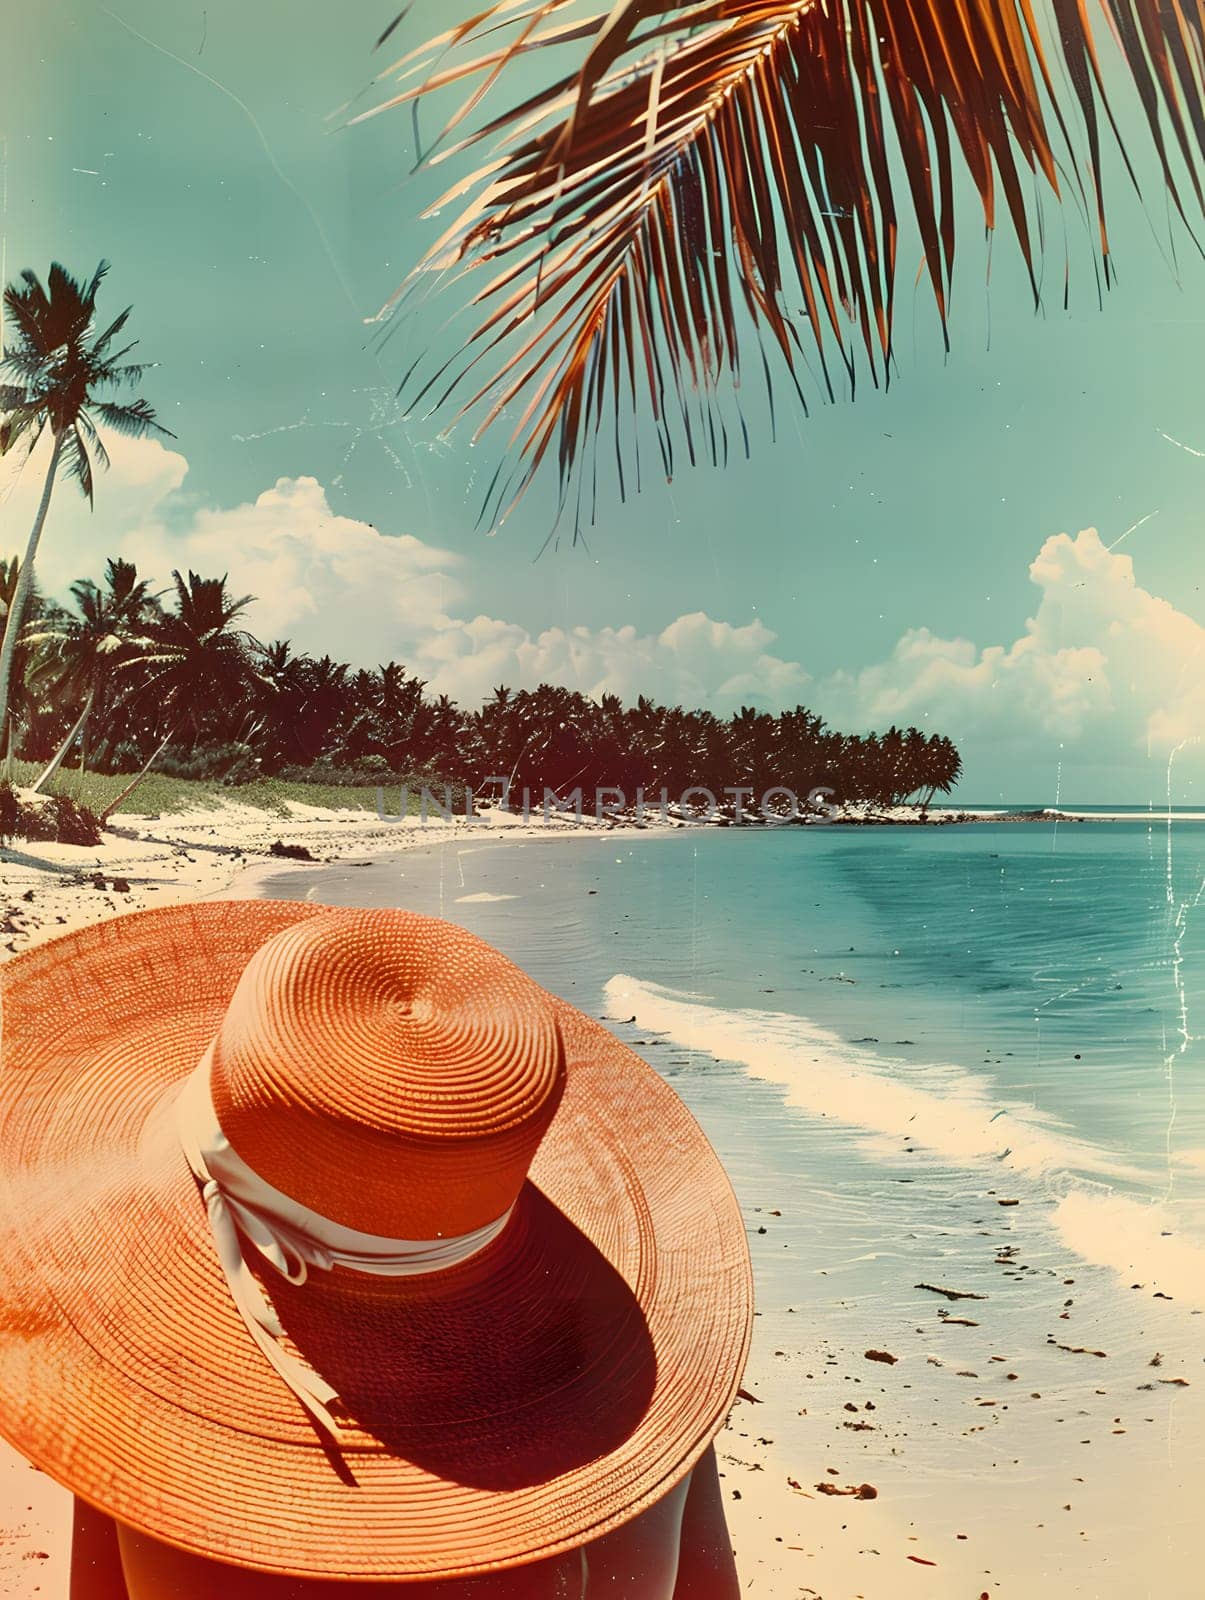 A person with a hat enjoying the azure sky and palm trees on the beach, feeling the warm sand beneath their feet and the gentle ocean breeze